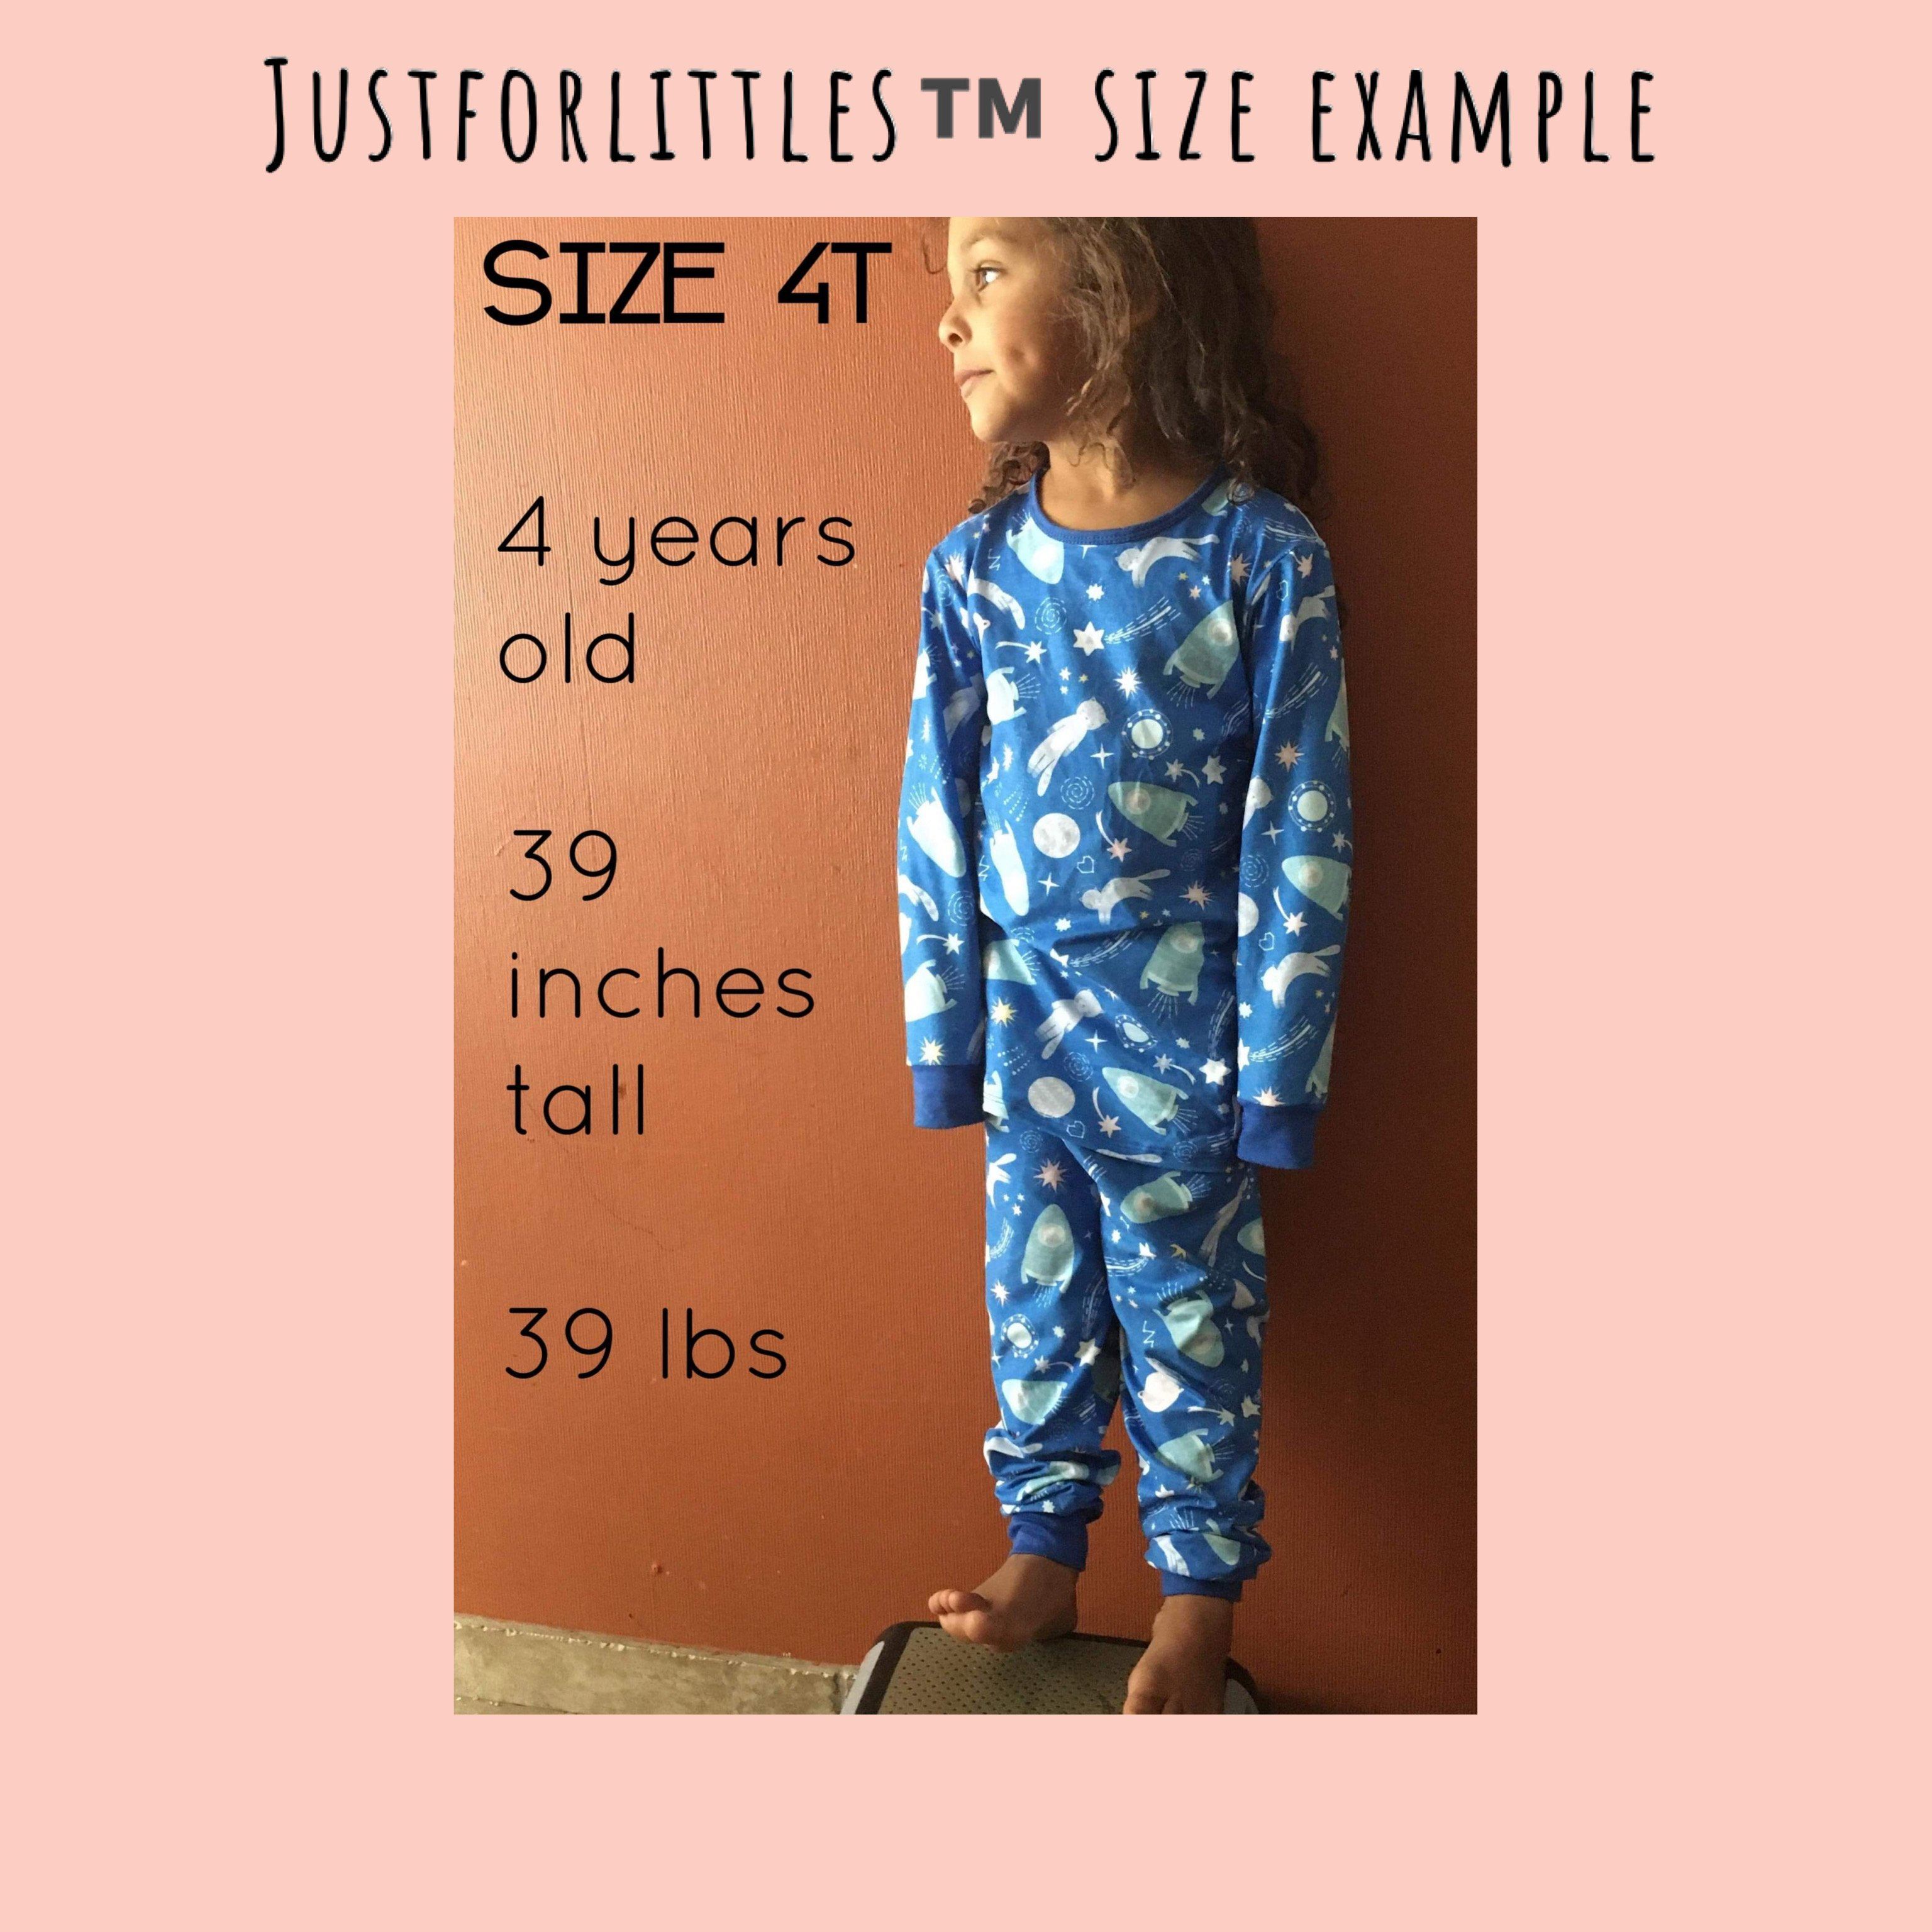 Construction Truck Pajamas Pajamas Just For Littles™ 